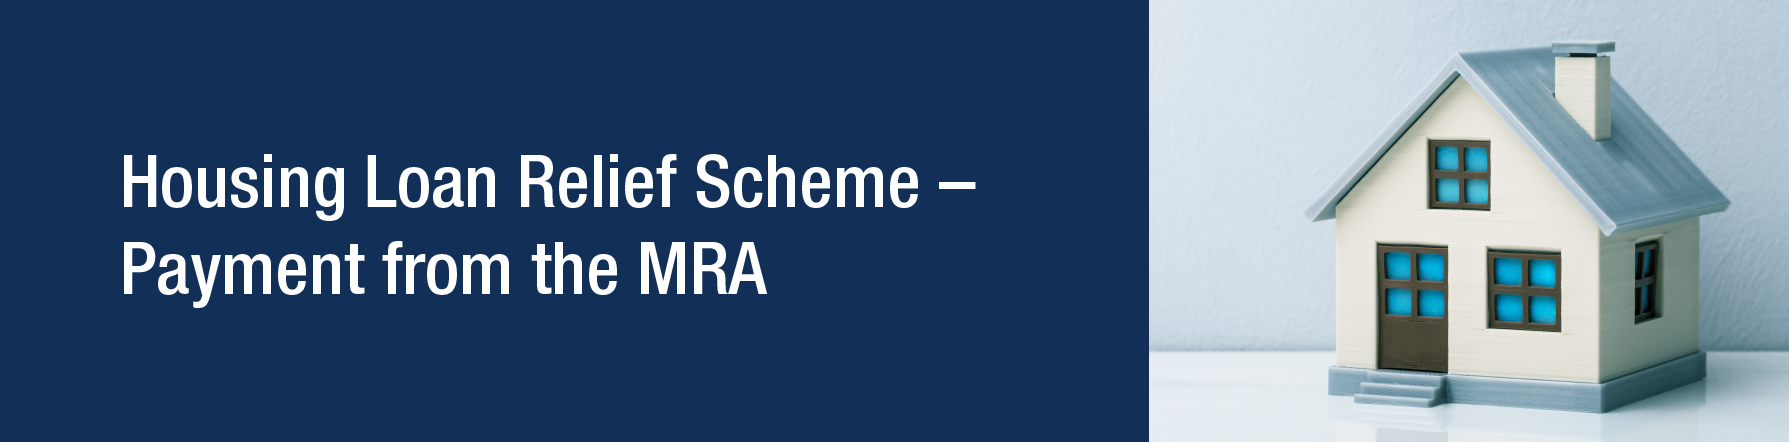 Communique - Housing Loan Relief Scheme – Payment from the MRA